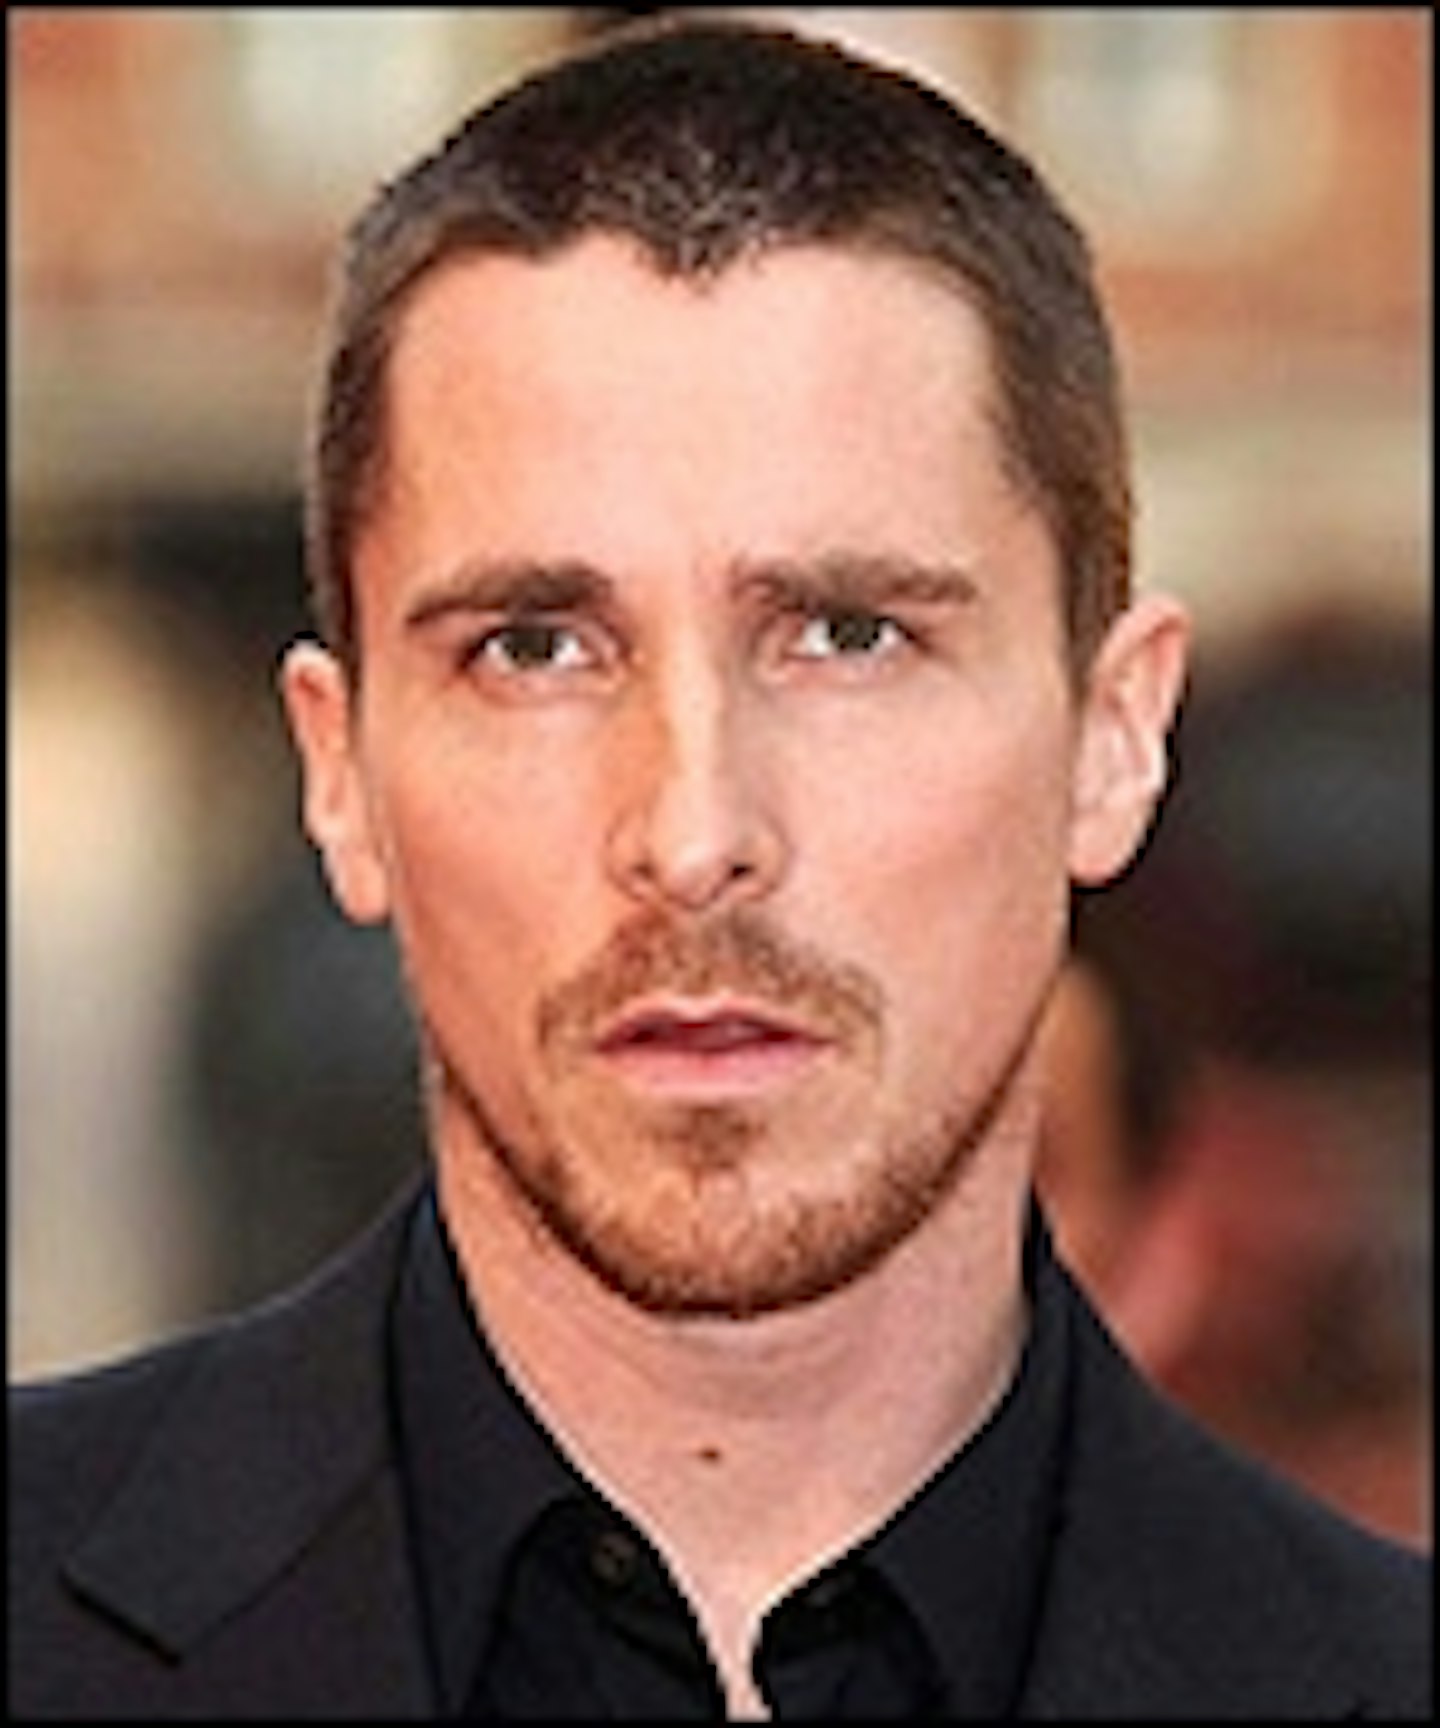 Fighter Talk From Christian Bale